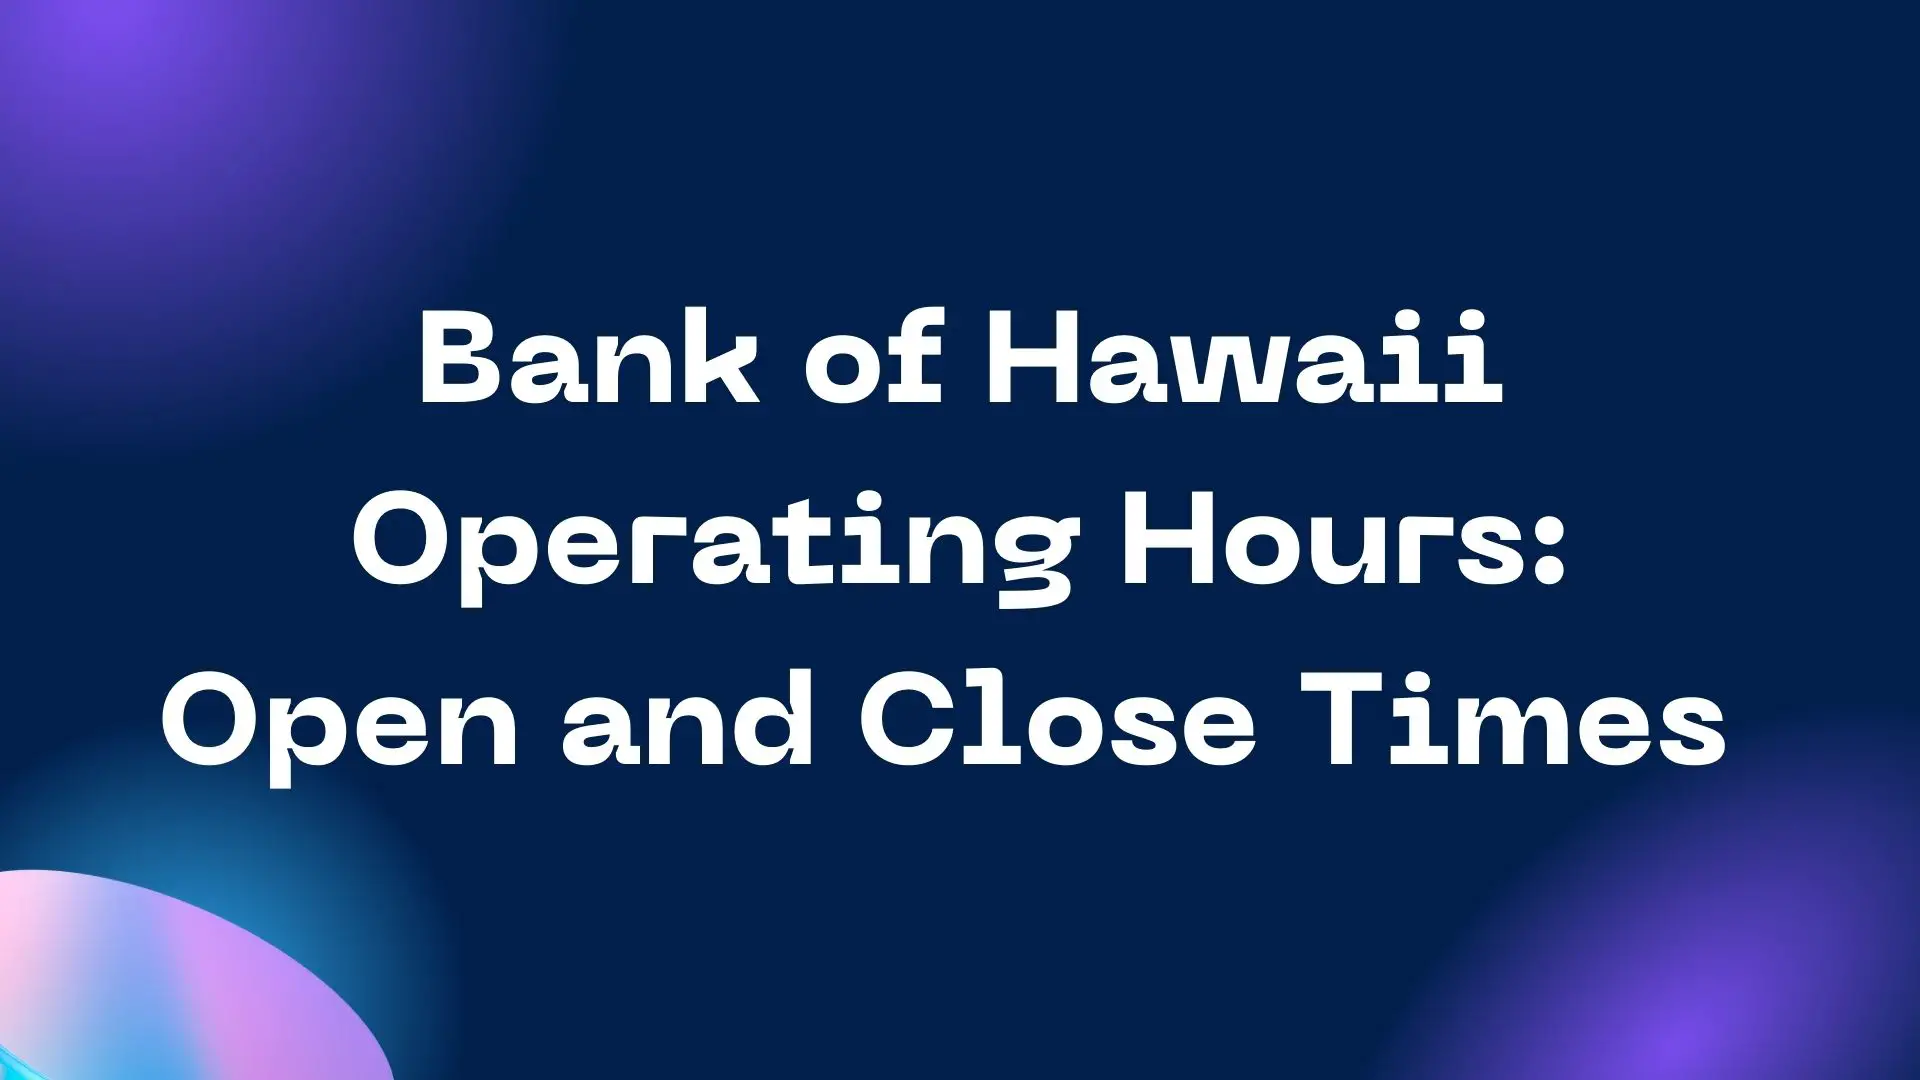 Bank of Hawaii Operating Hours: Open and Close Times